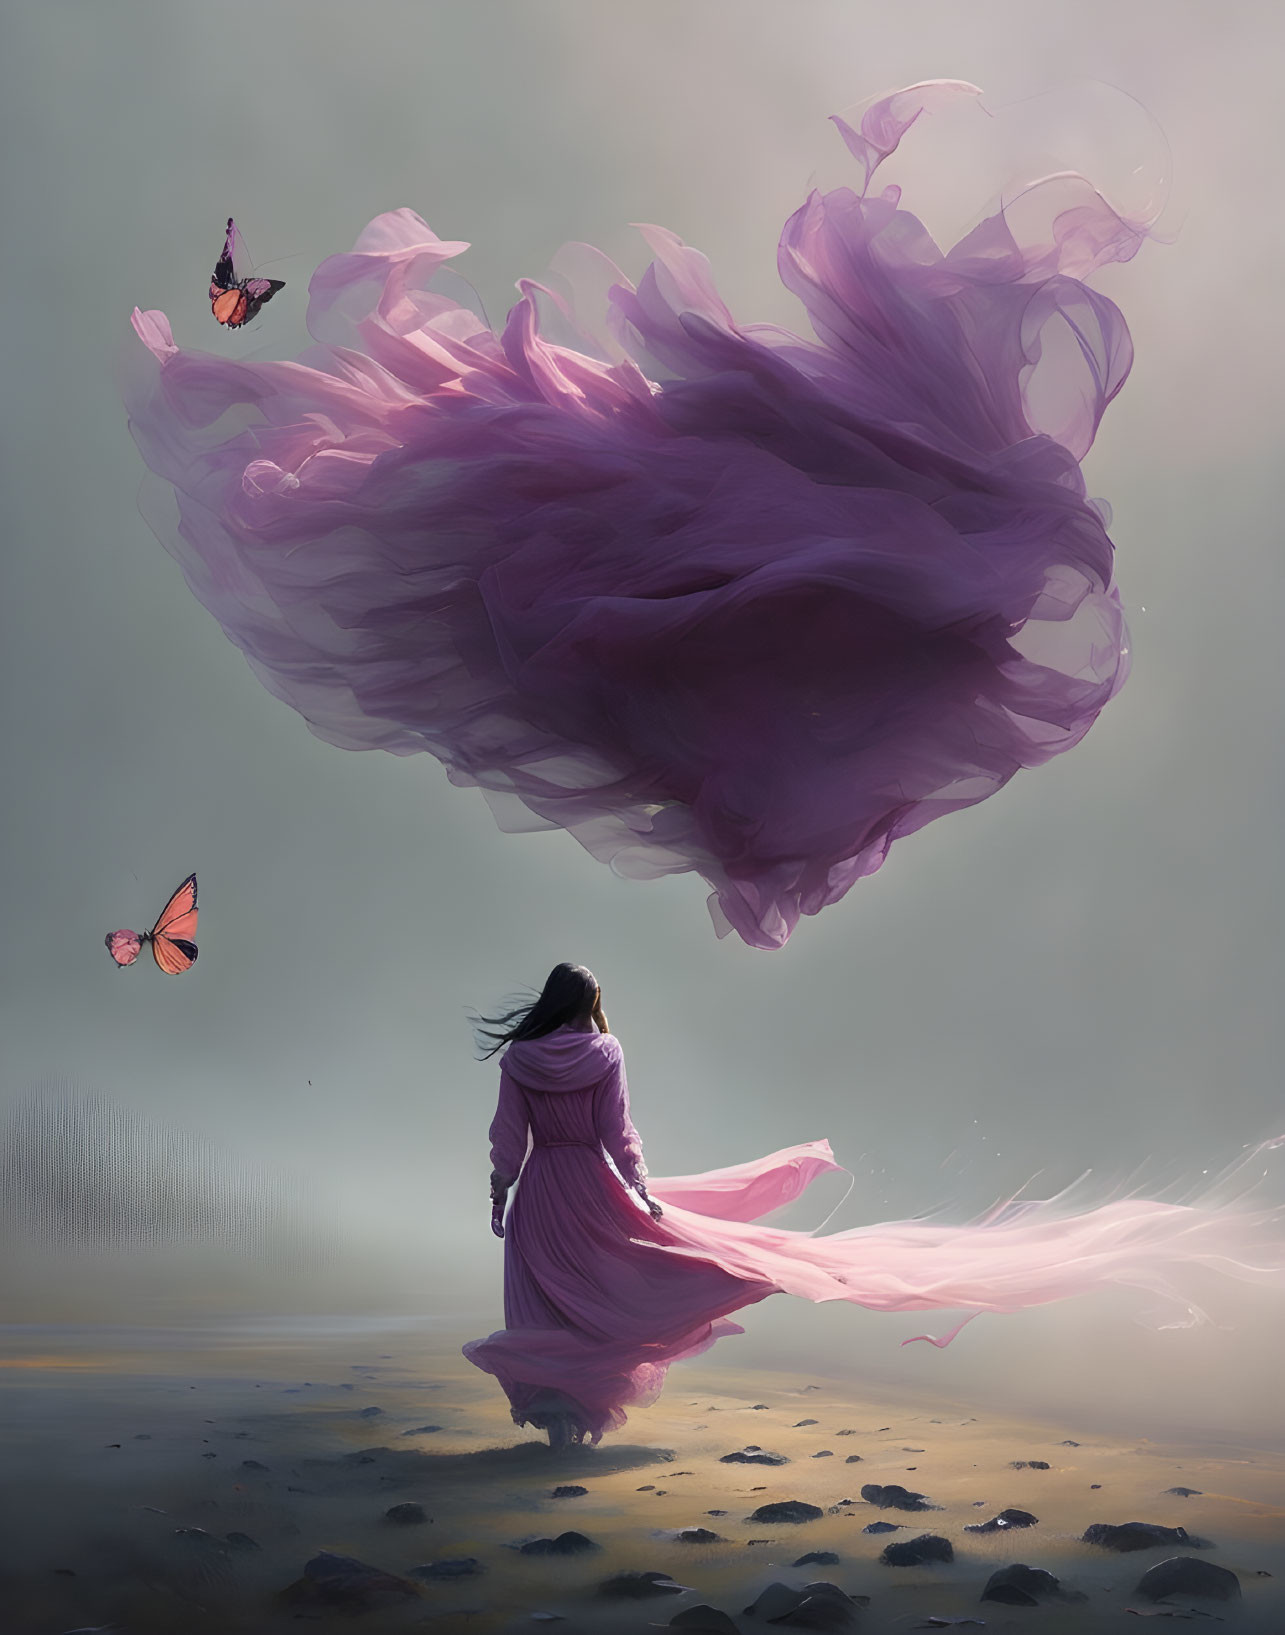 Woman in Purple Dress Stands on Moody Beach with Butterflies